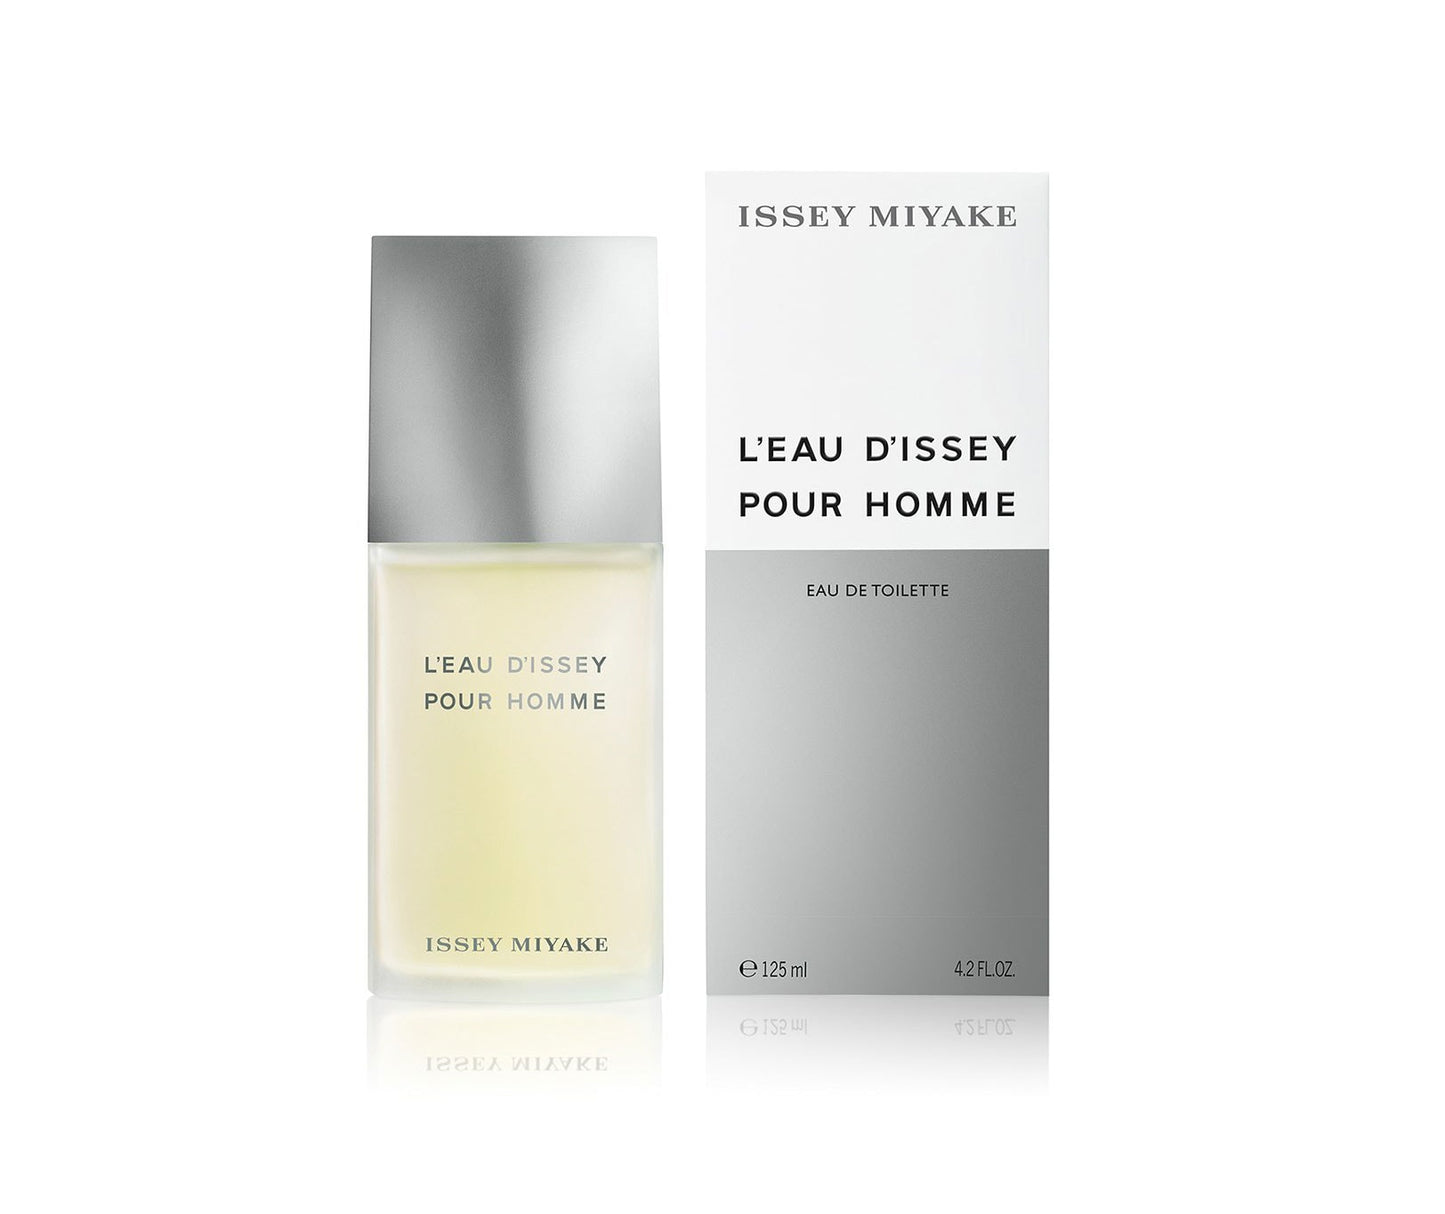 ISSEY MIYAKE POUR HOMME – Pride Perfumes